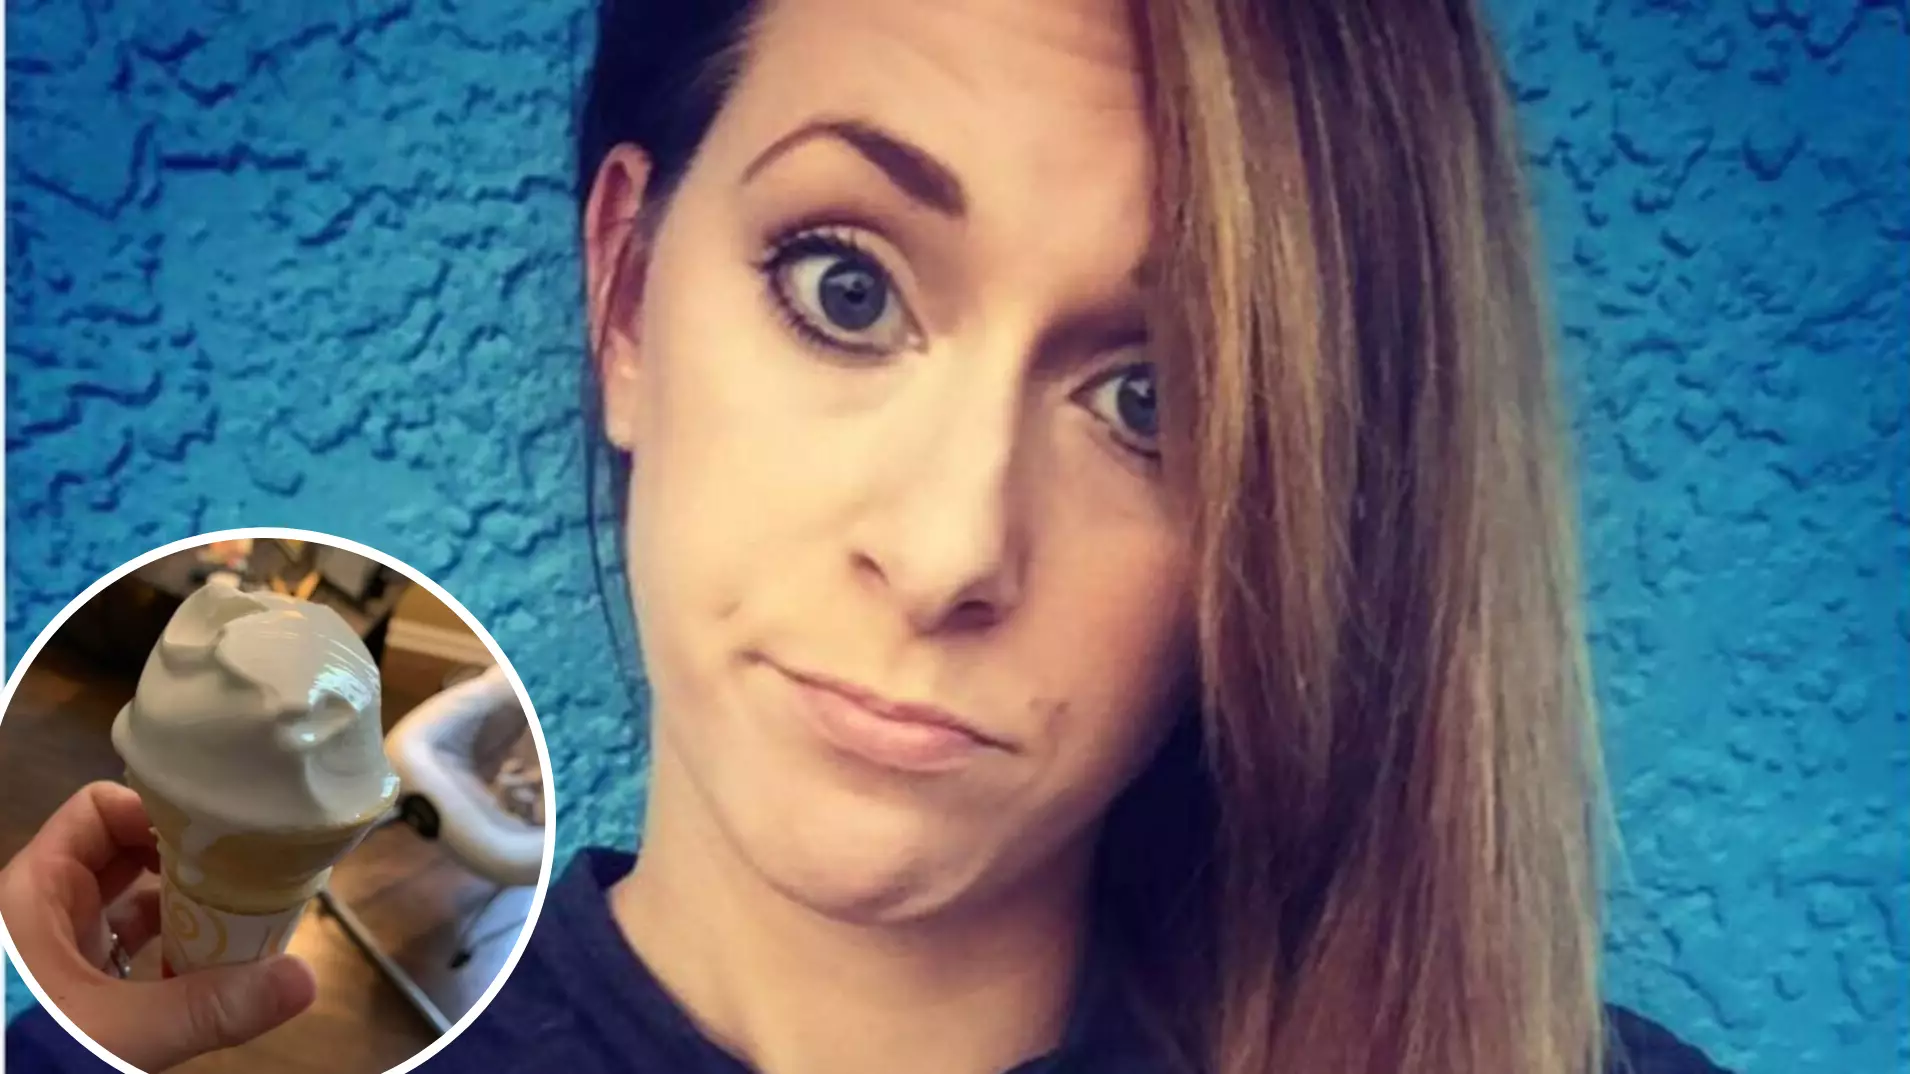 Mum Gets Disgusting Shock After Sharing Ice Cream With Daughter